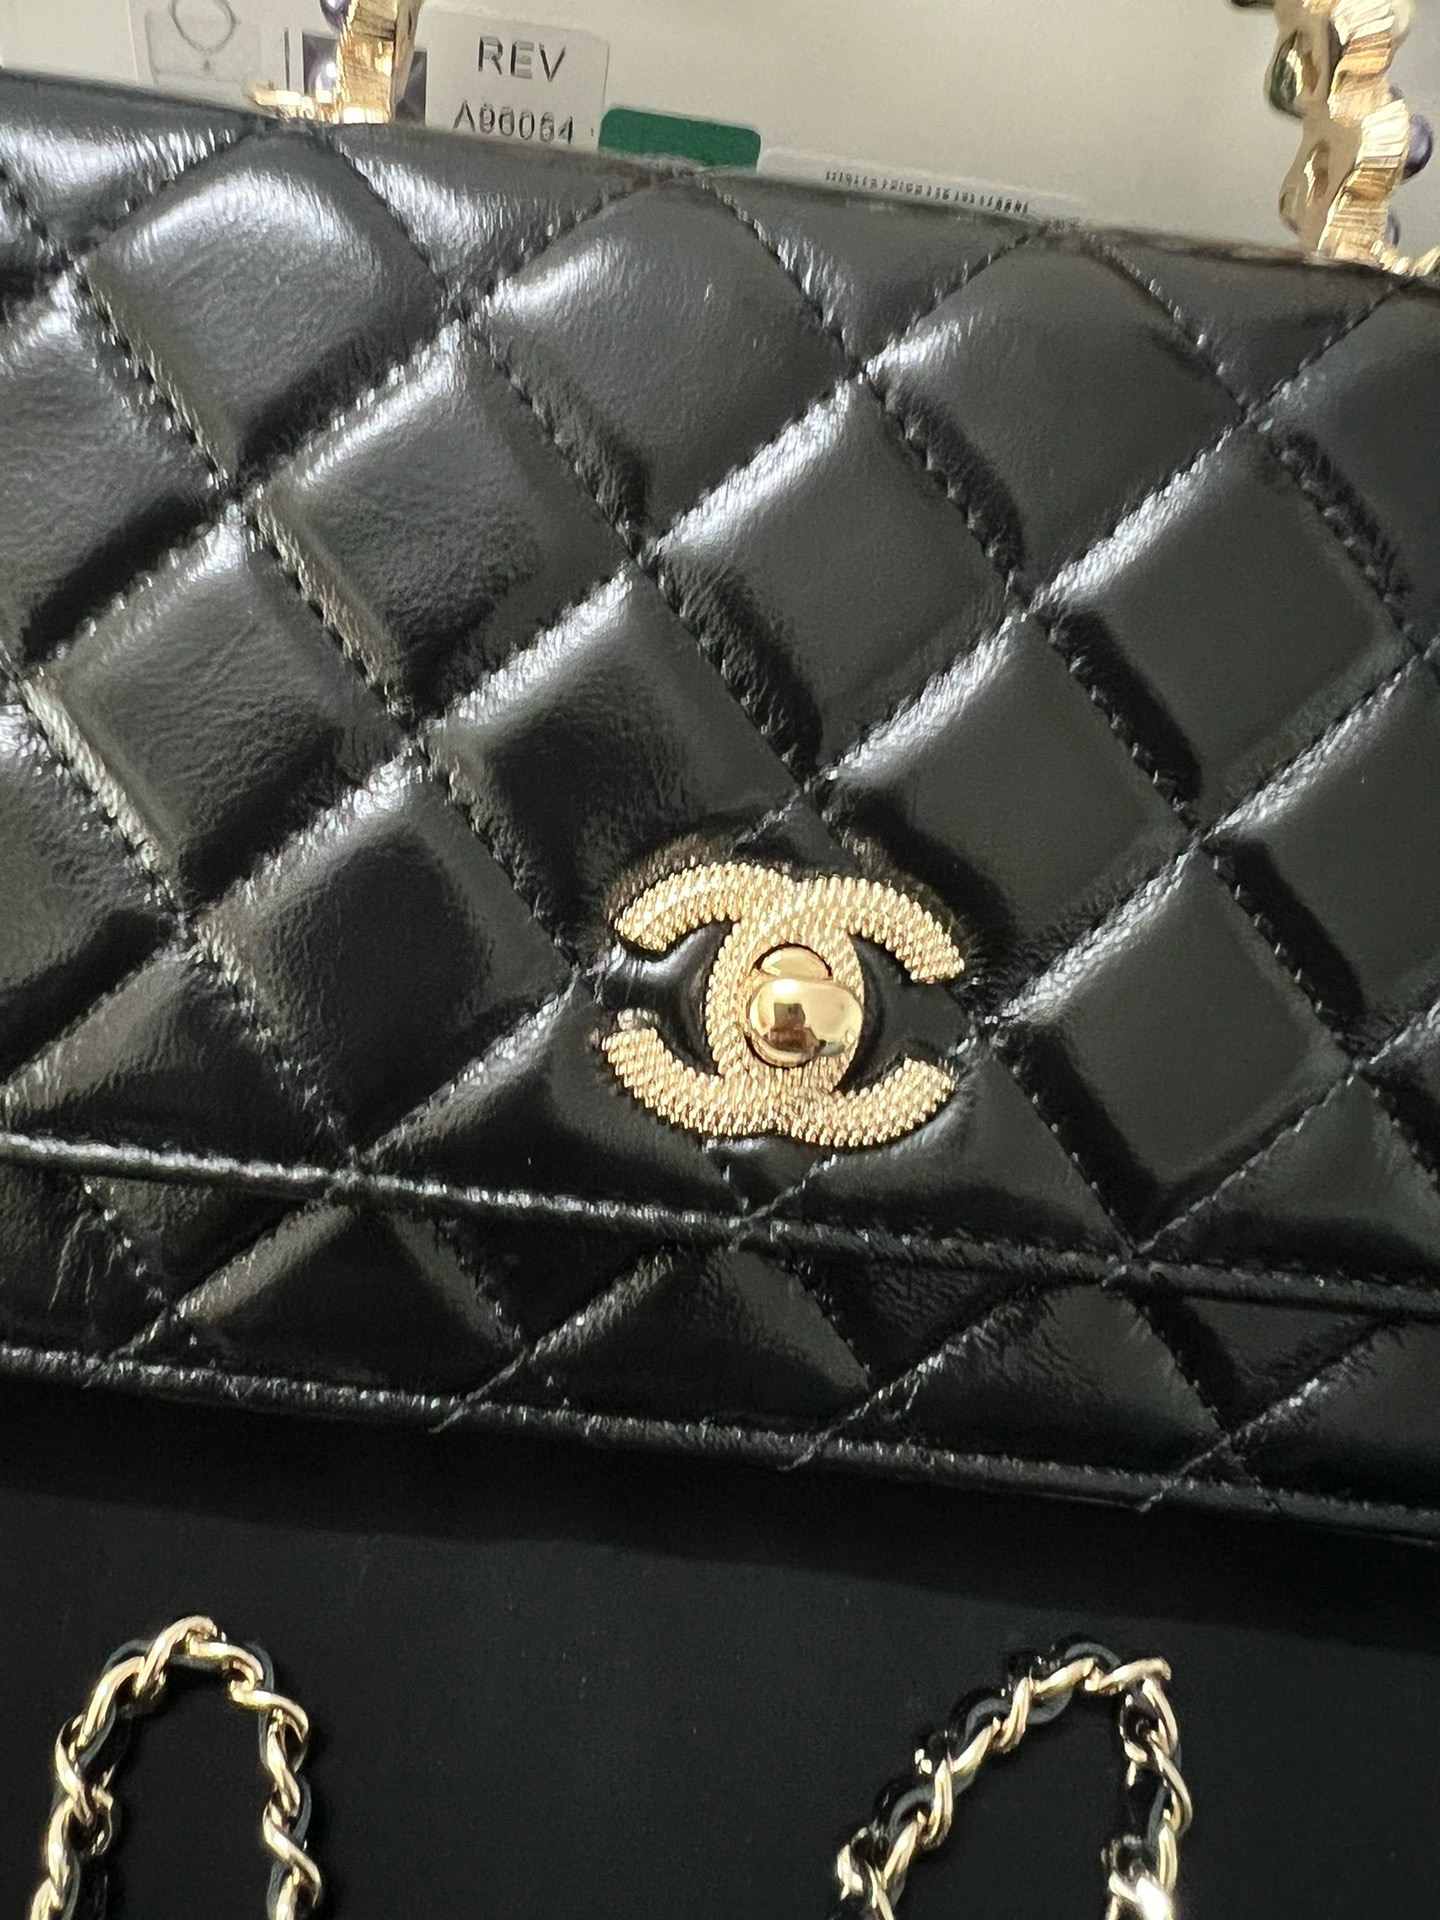 CHANEL FLAP PHONE HOLDER WITH CHAIN AC3566 black